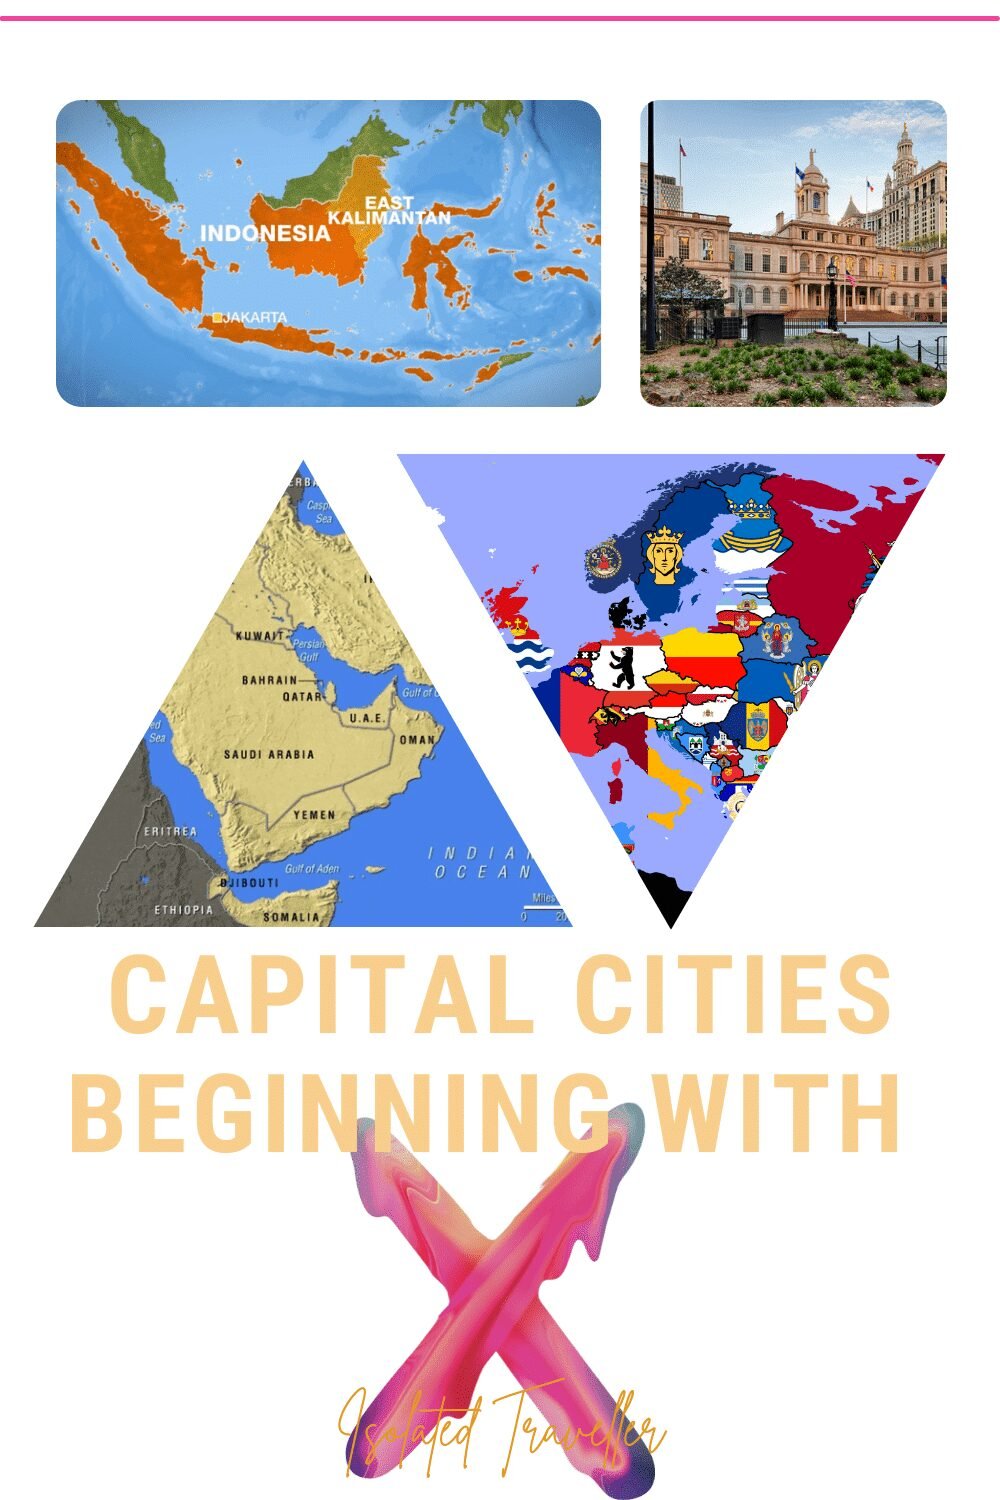 Capital Cities beginning with x